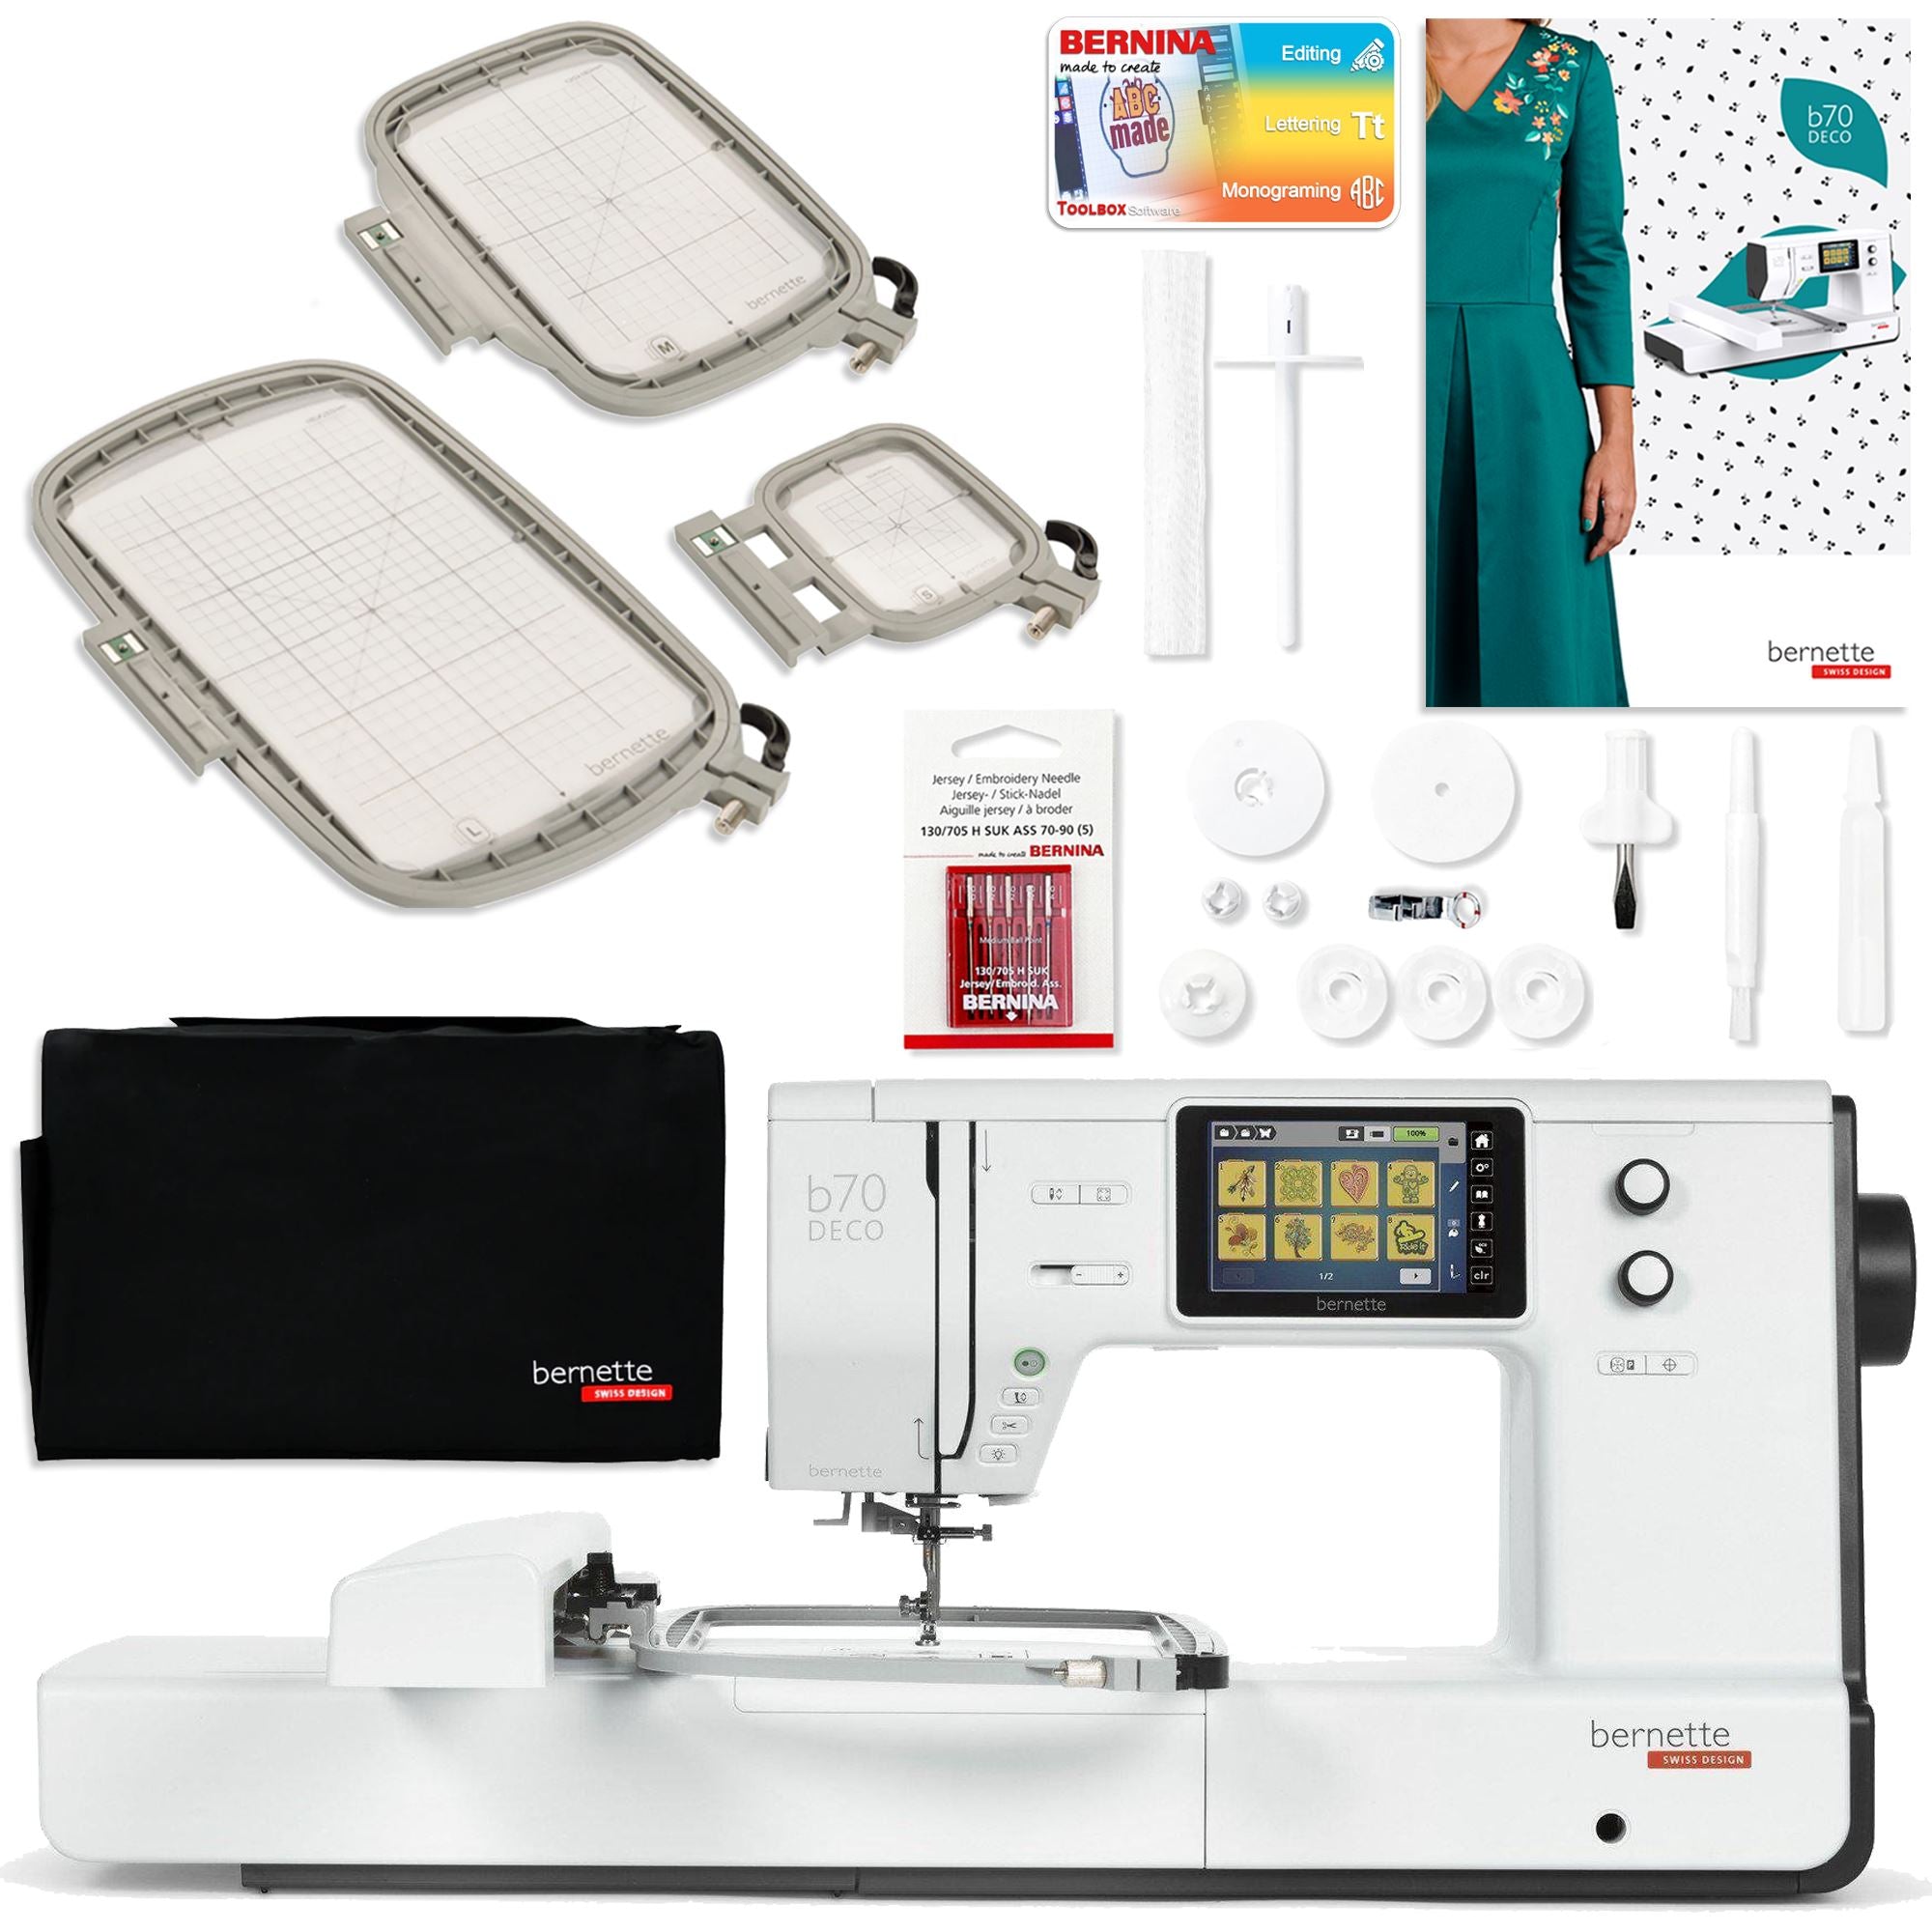 Brother SE700 Sewing & 4x4 Embroidery Machine Bundles– Swing Design